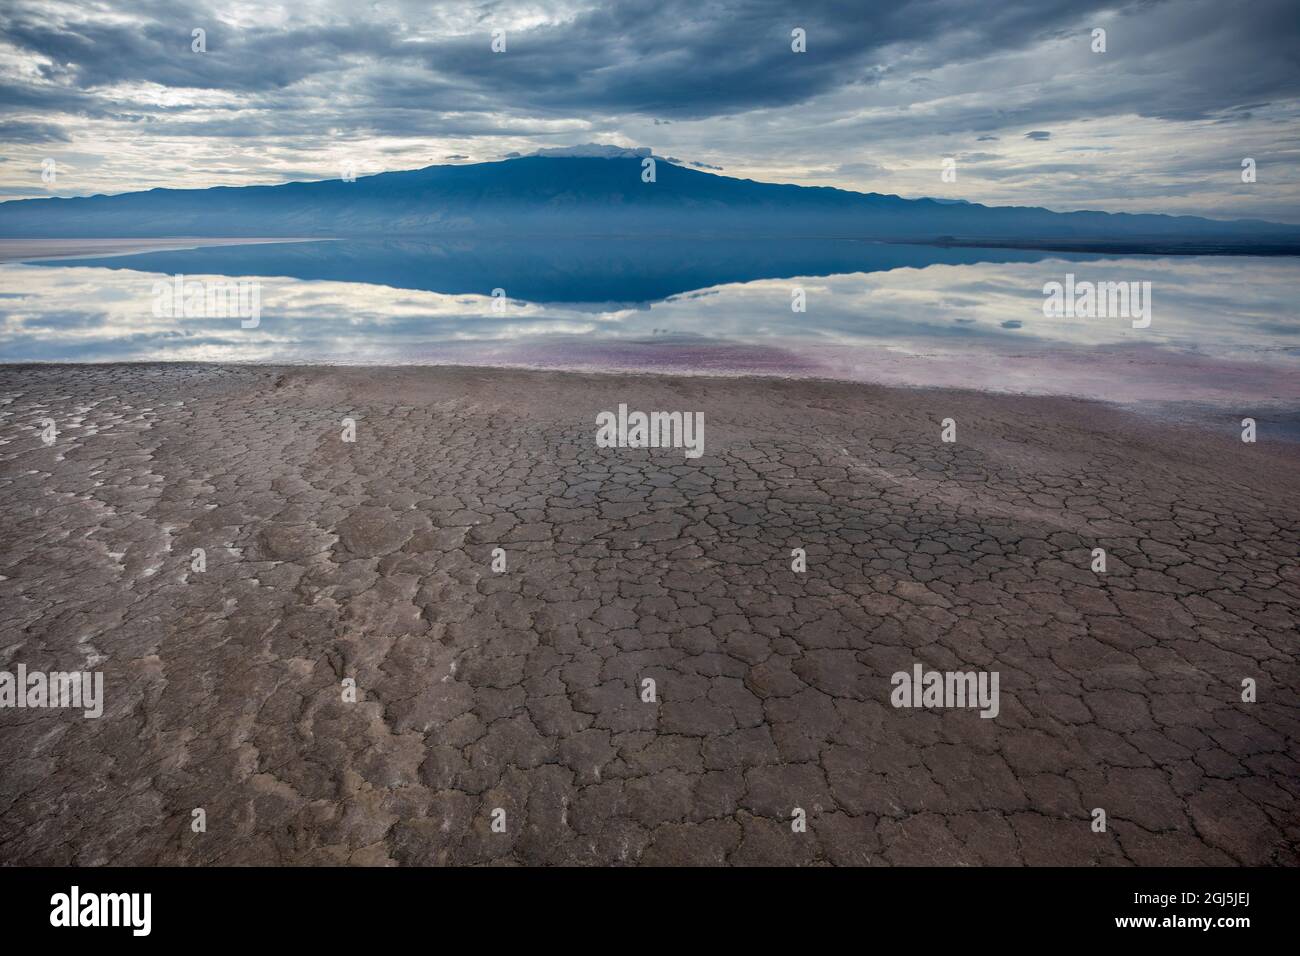 Africa, Tanzania, Aerial view of patterns in caked mud along shallow salt waters of Lake Natron and Rift Valley peaks Stock Photo